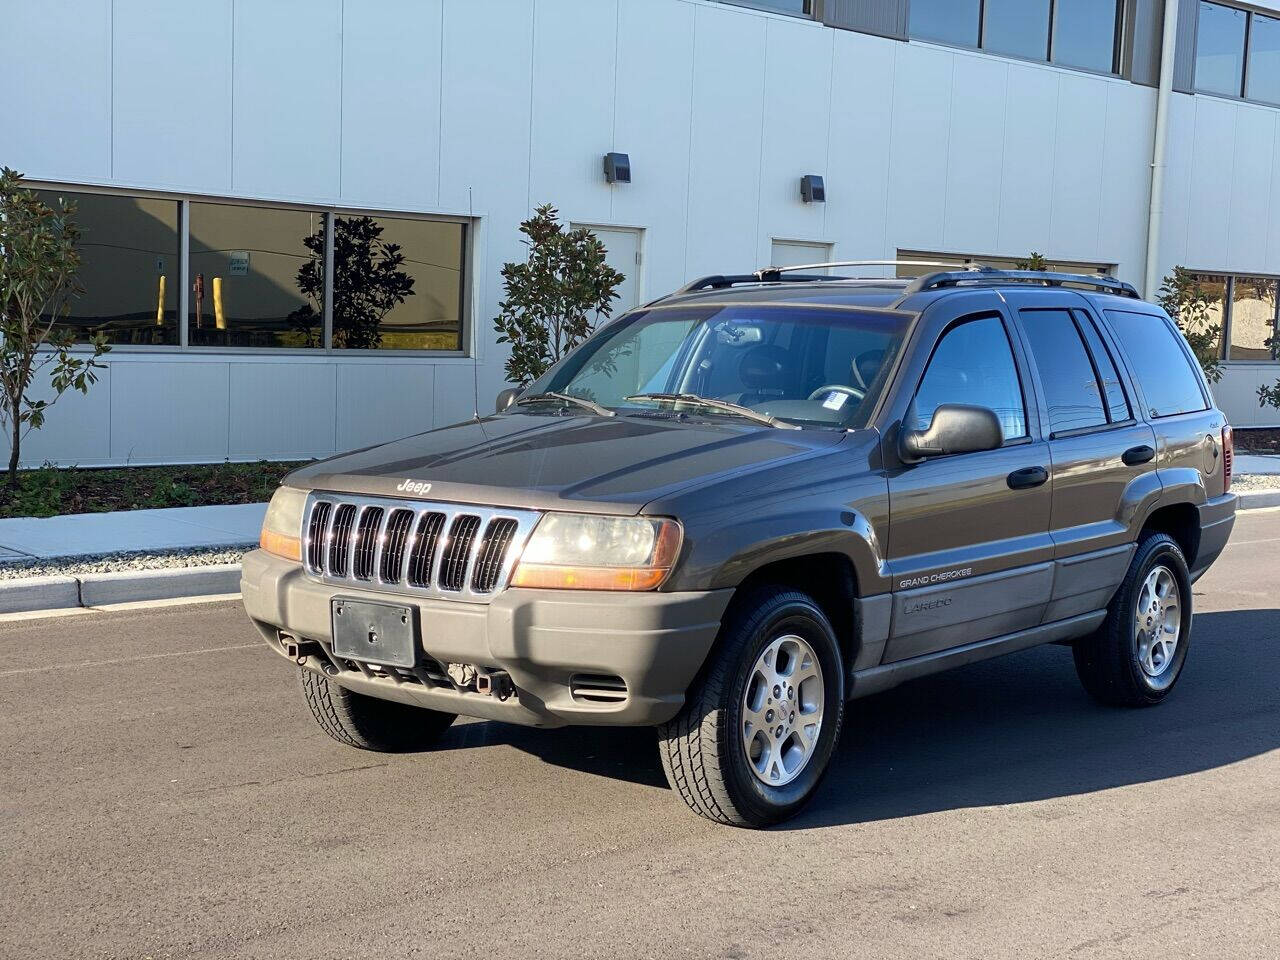 Used 1999 Jeep Grand Cherokee For Sale In Yelm Wa Carsforsale Com